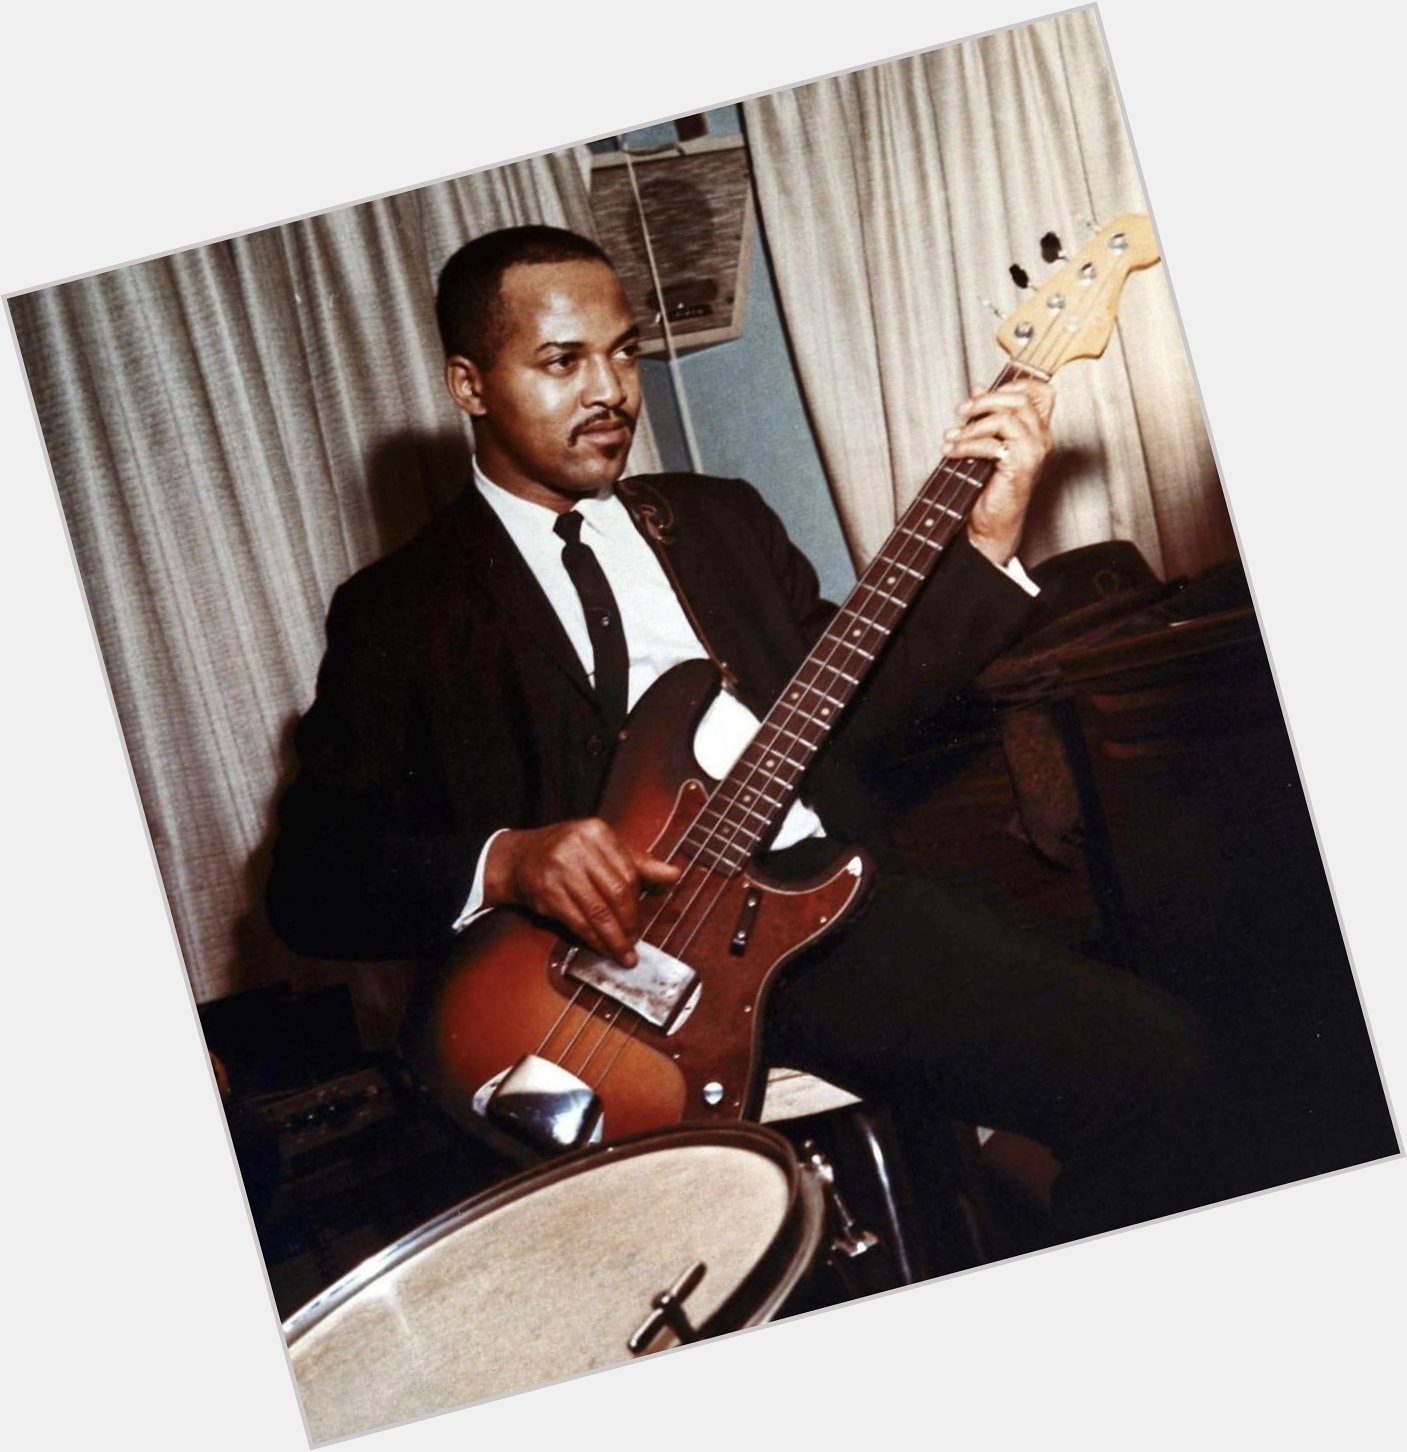 Happy Birthday to the great 
James Jamerson  